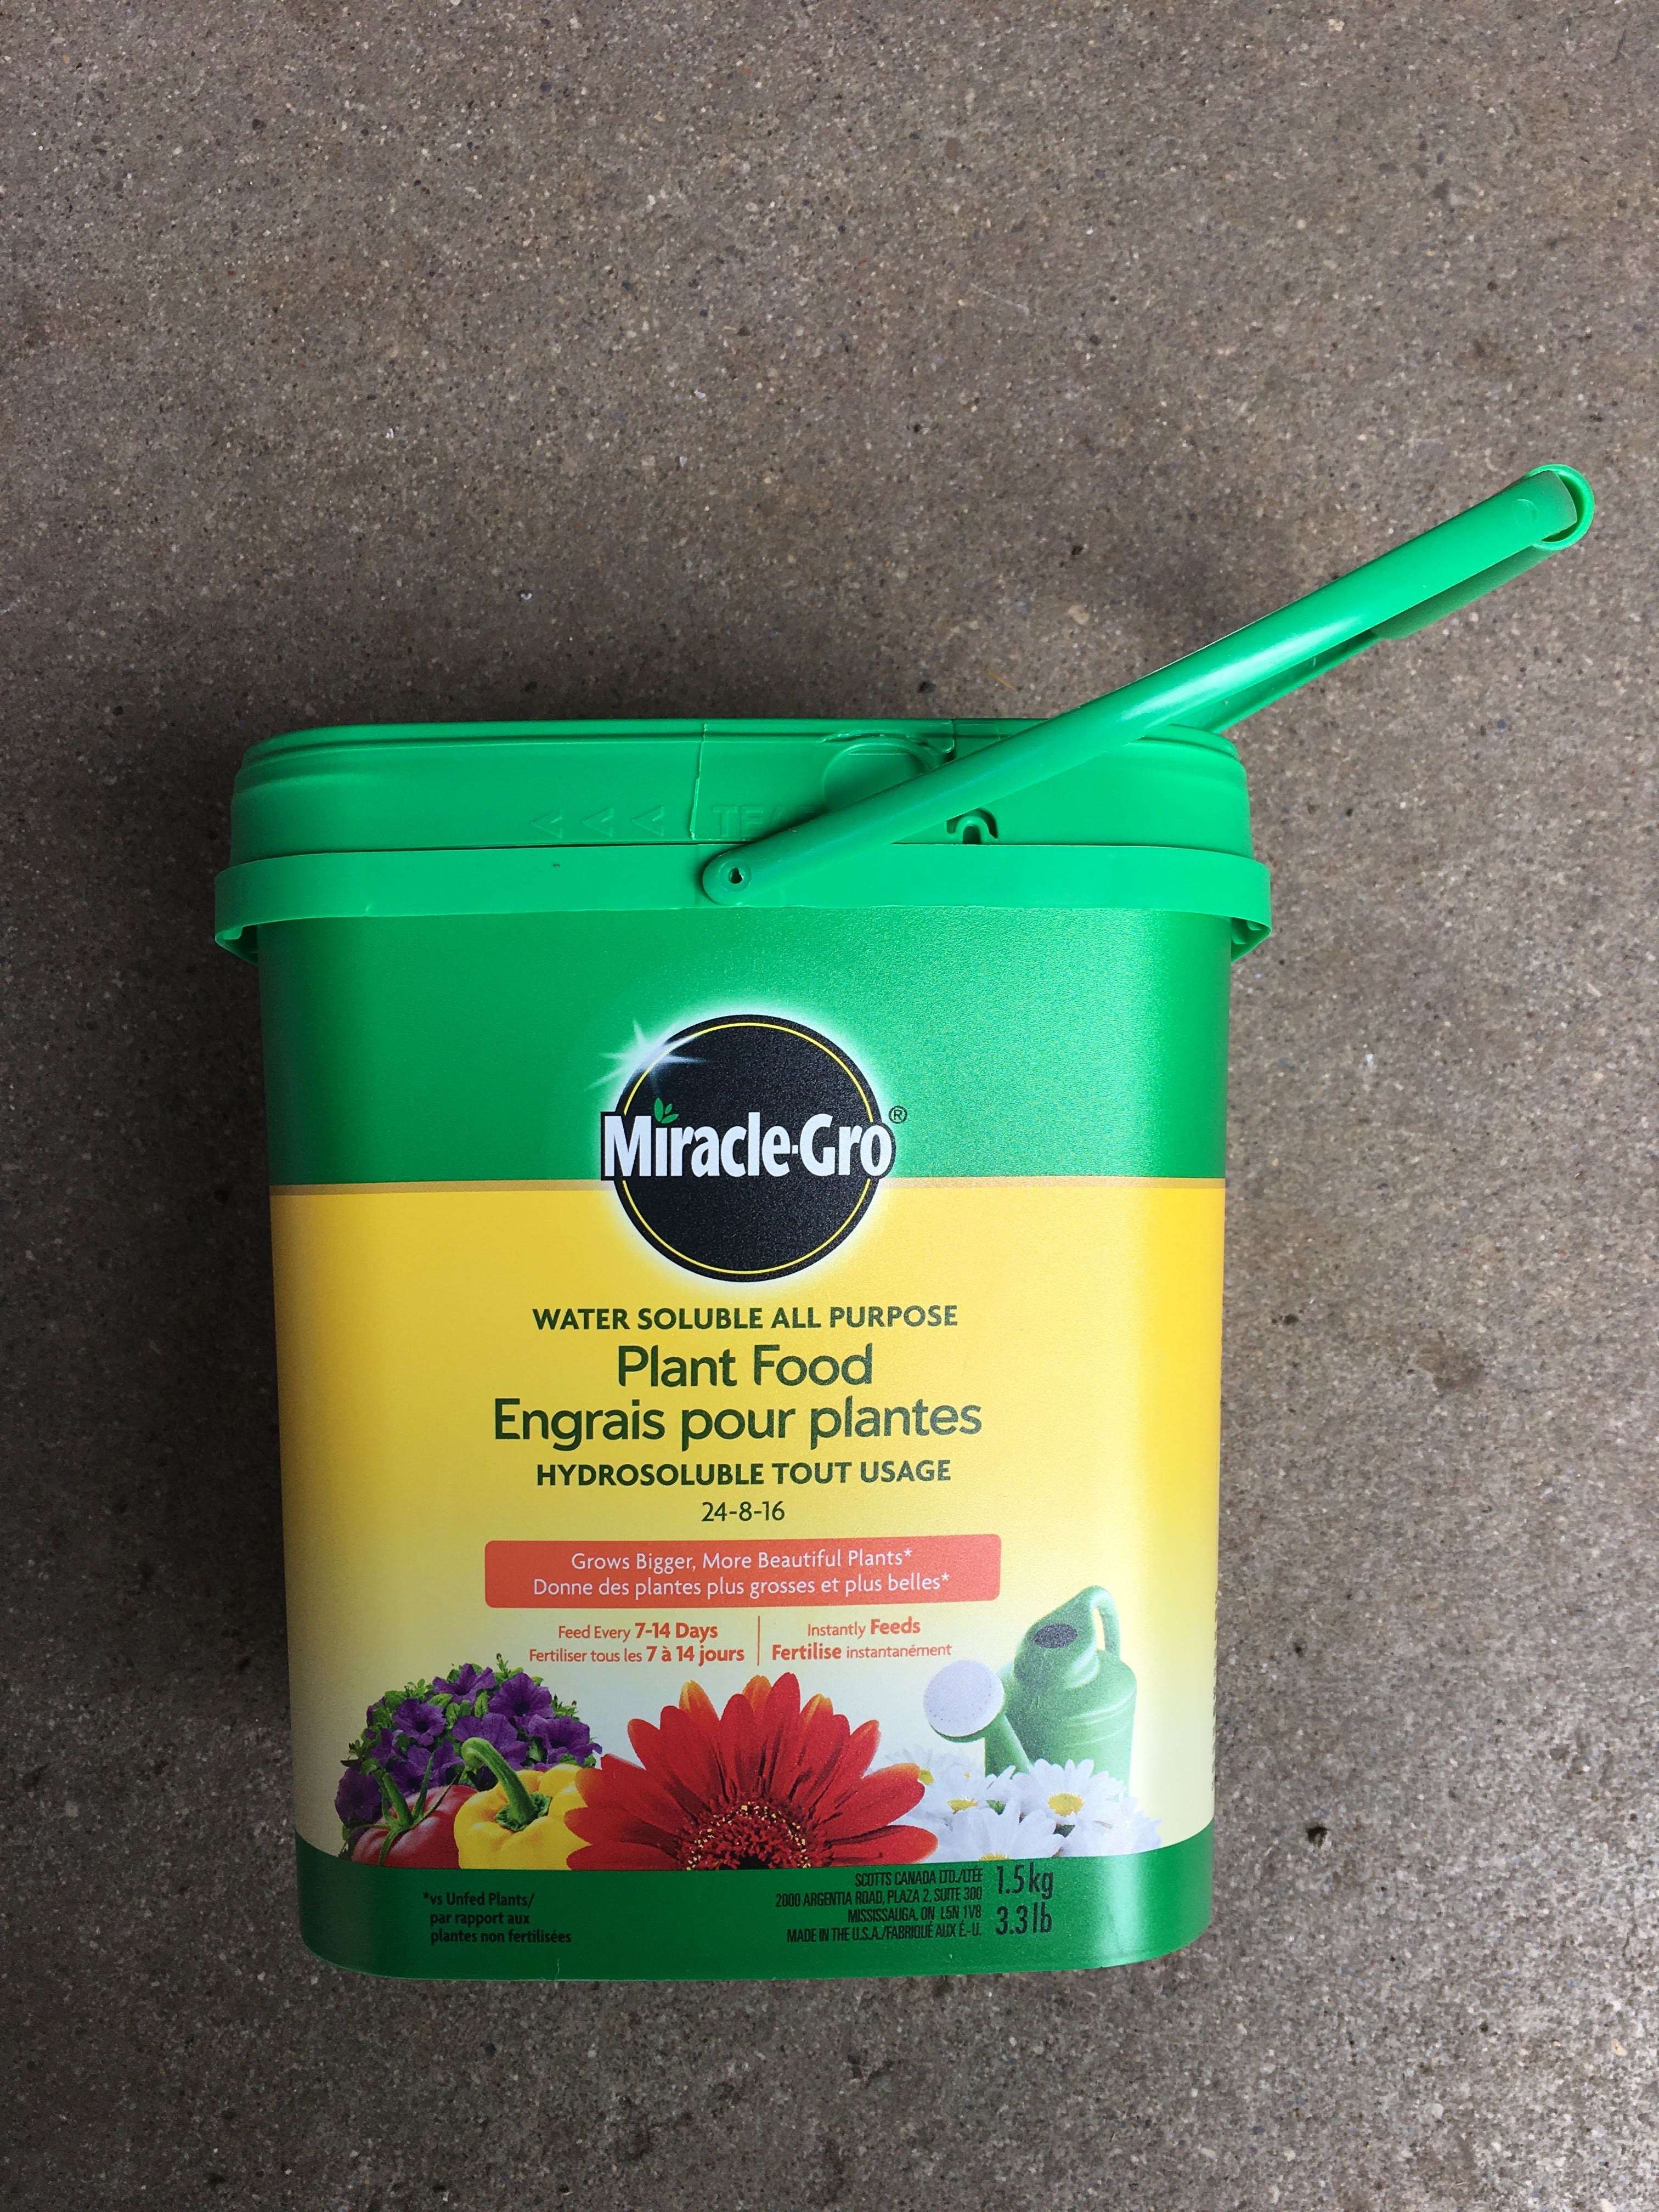 All Purpose Water Soluble Miracle Gro (1.5kg)